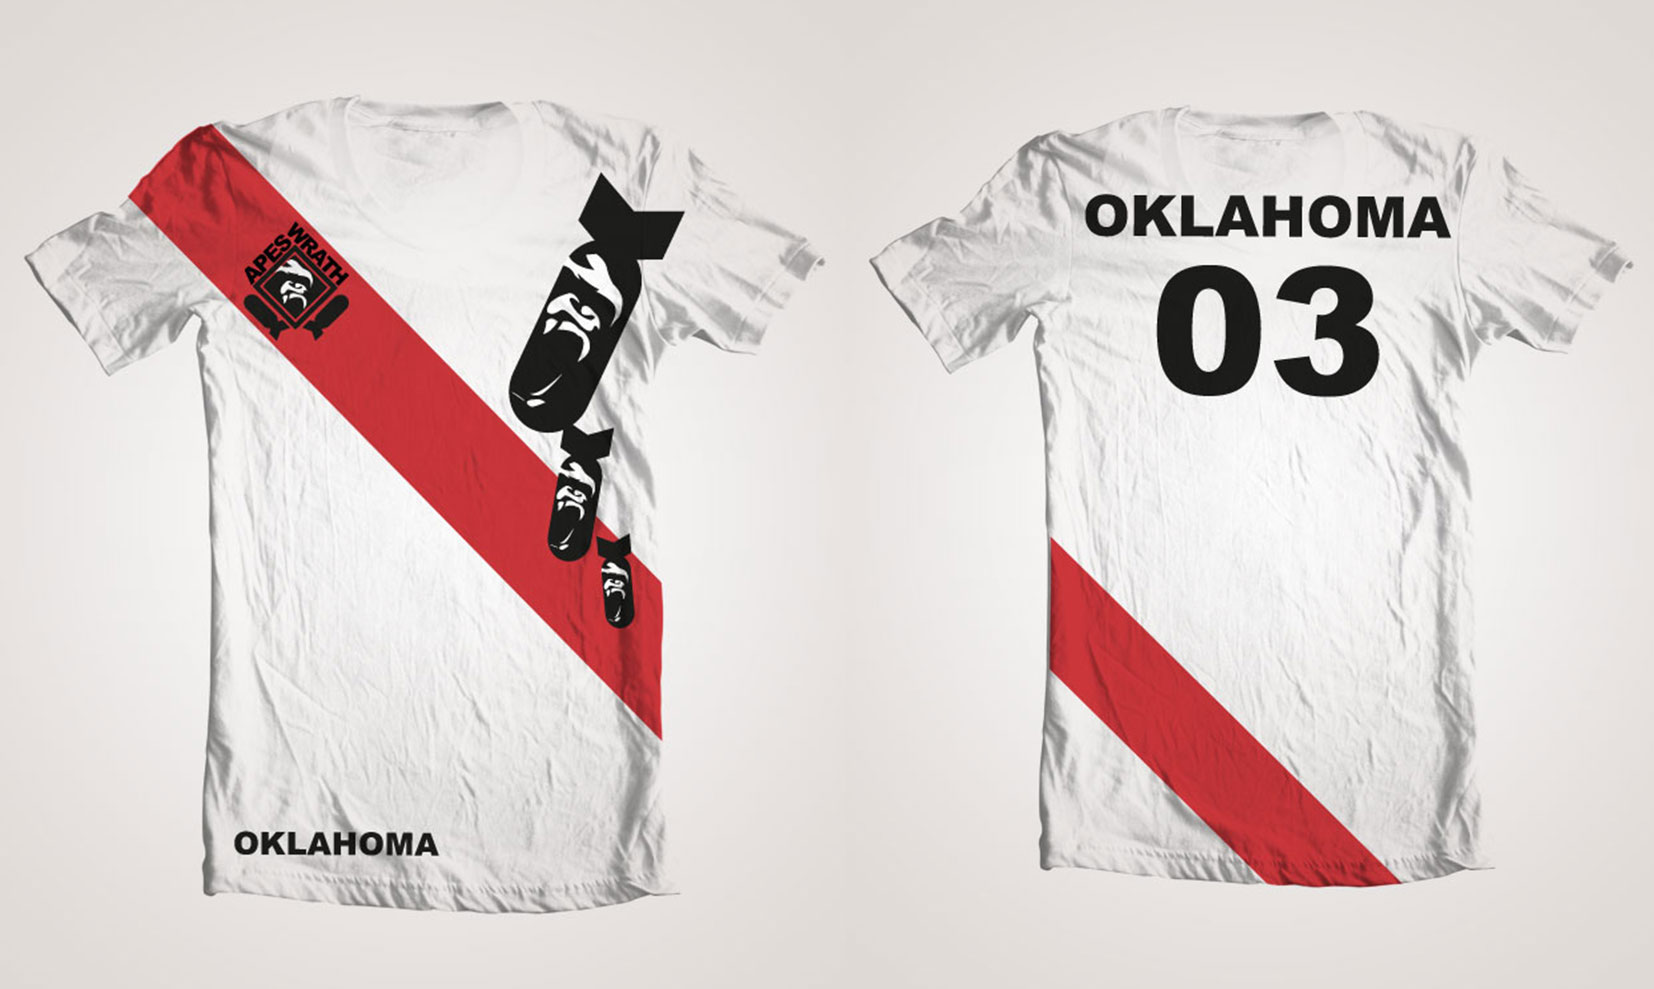 University of oklahoma ultimate frisbee team apes of wrath jersey design white